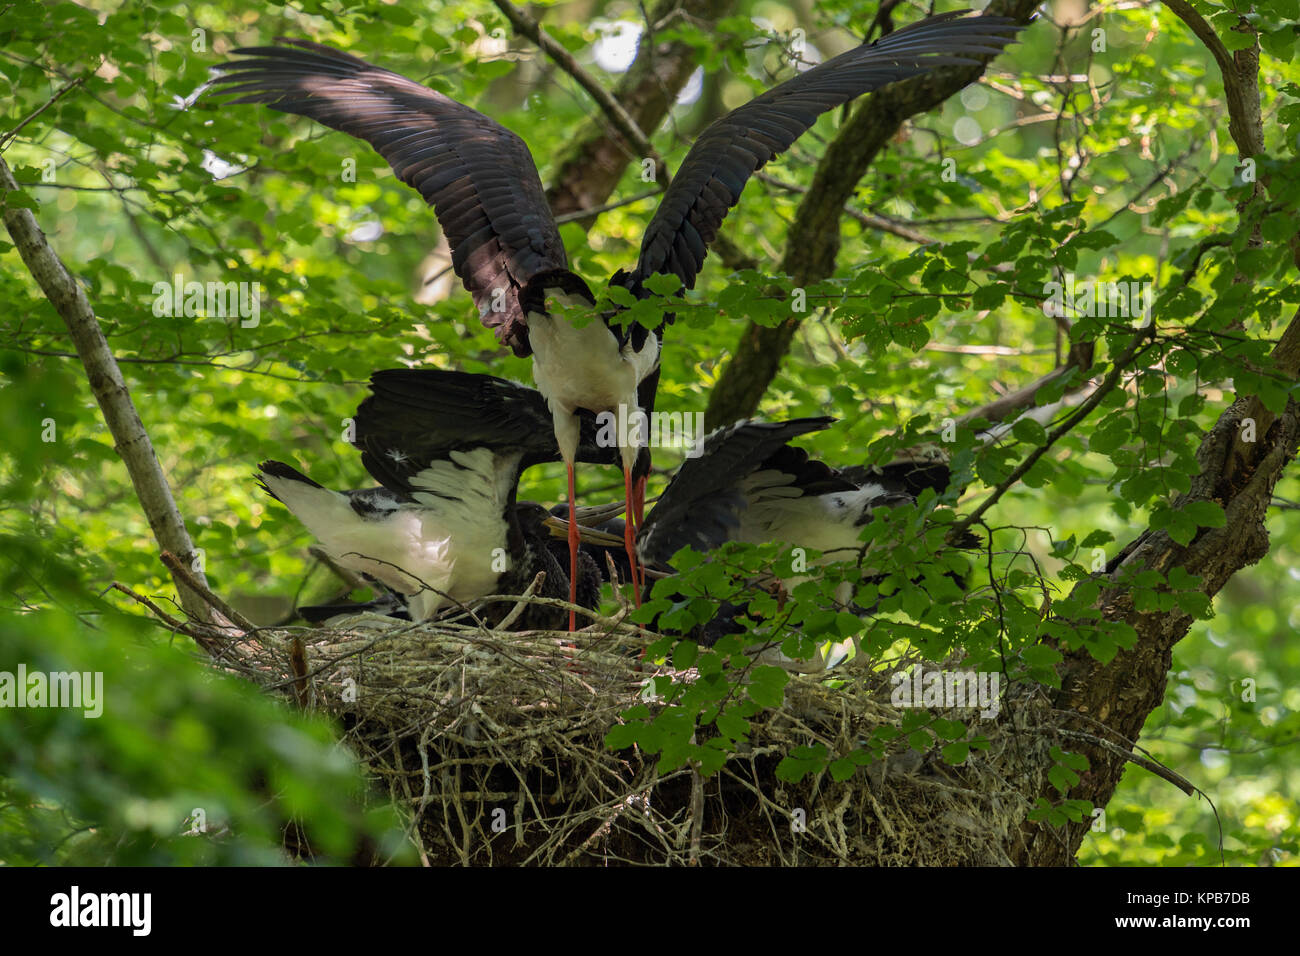 Black Stork / Storks (Ciconia nigra) at their nesting site, adult feeding its chicks, high up in a huge old beech tree, hidden, secretive, Europe. Stock Photo